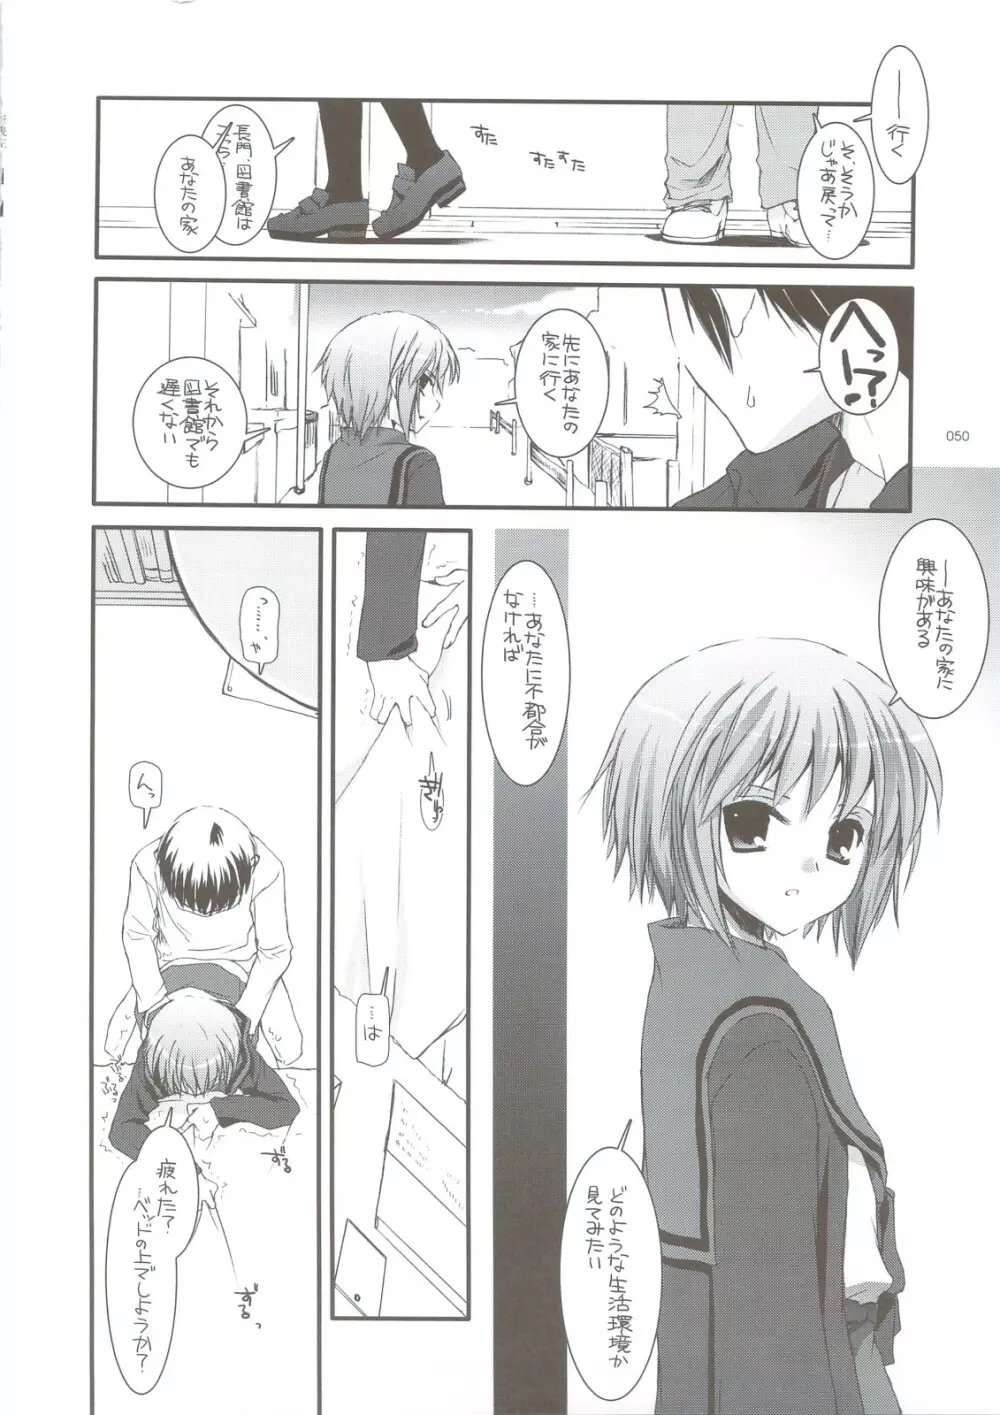 DL-SOS 総集編 - page49